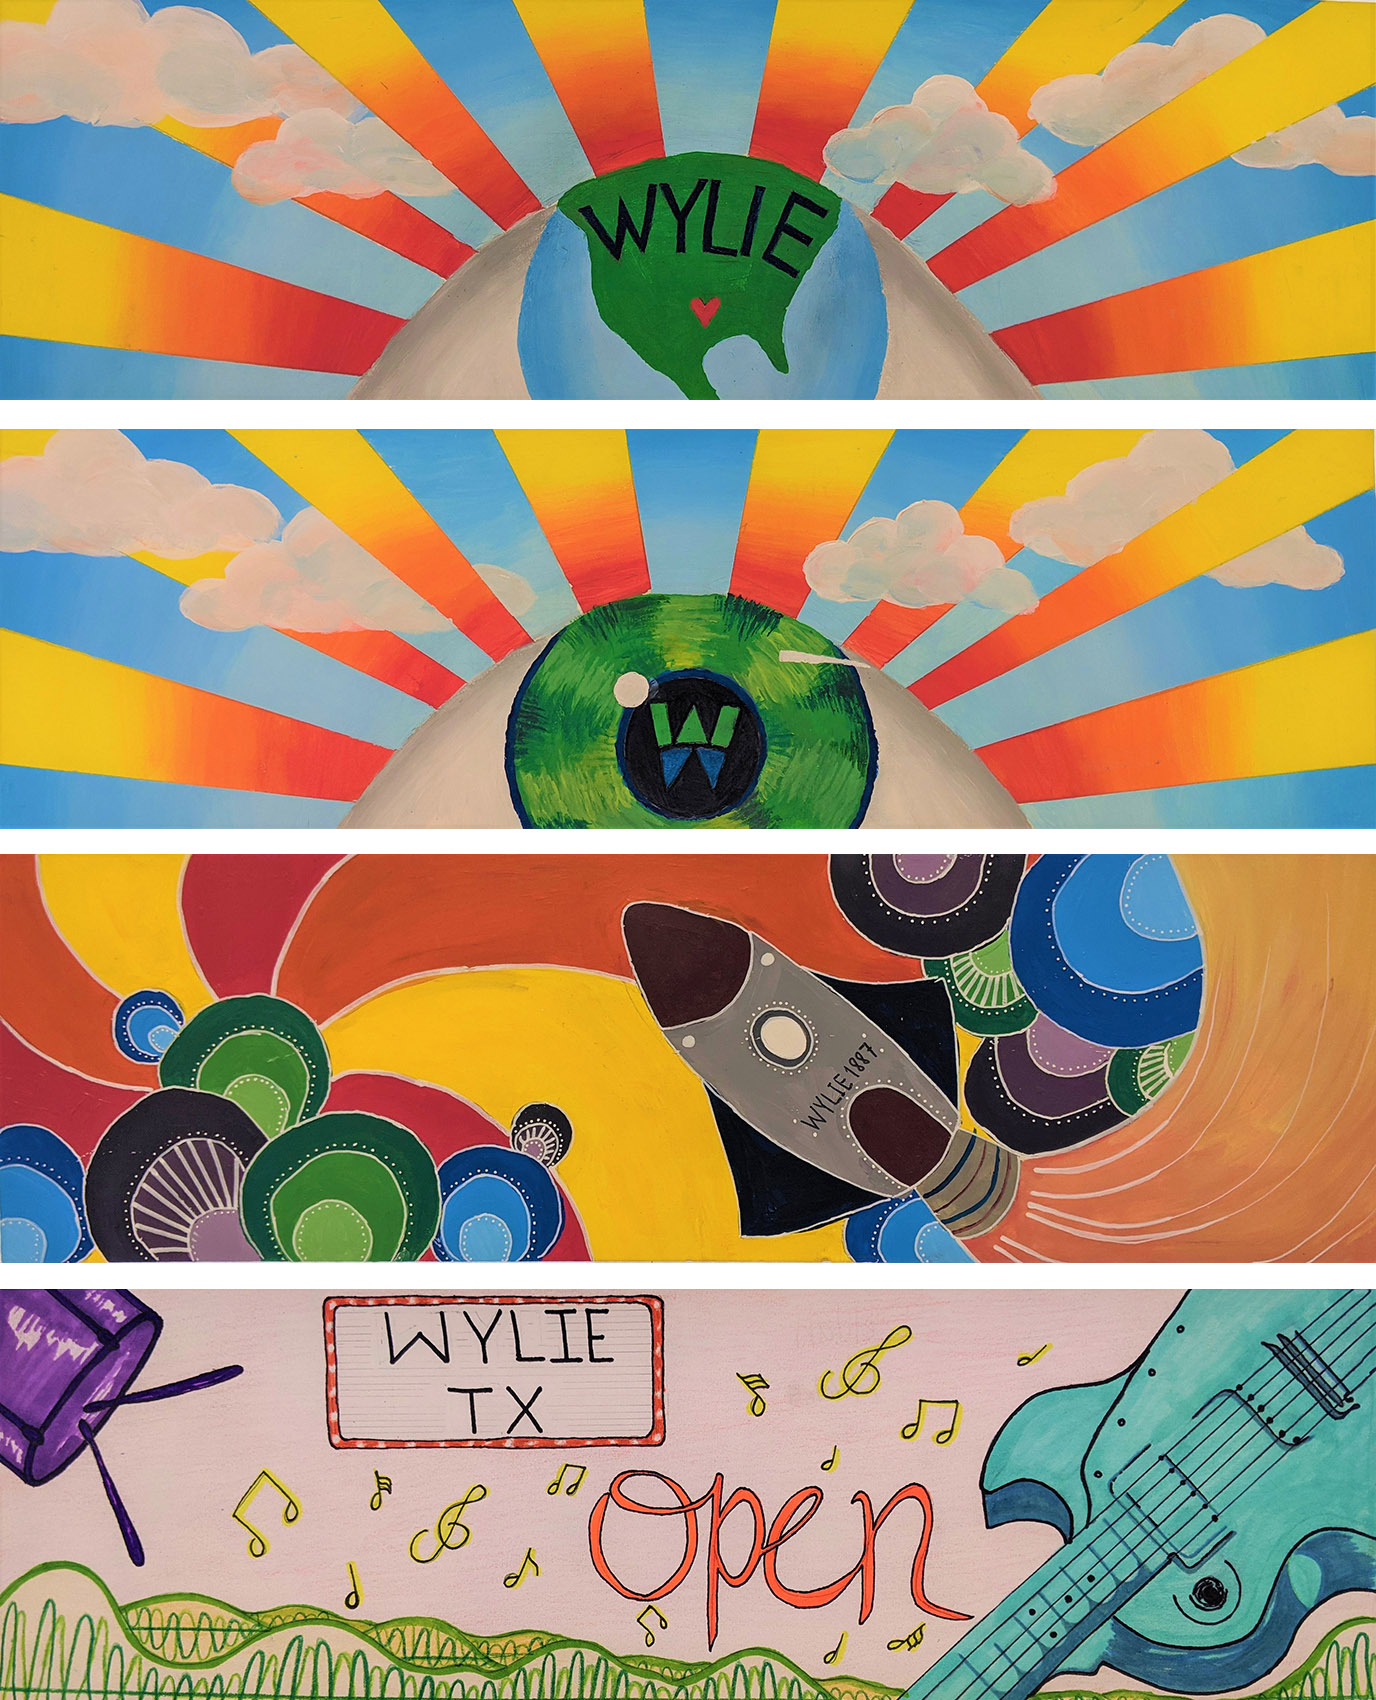 Potential mural ideas for Wylie as proposed by Collin College students